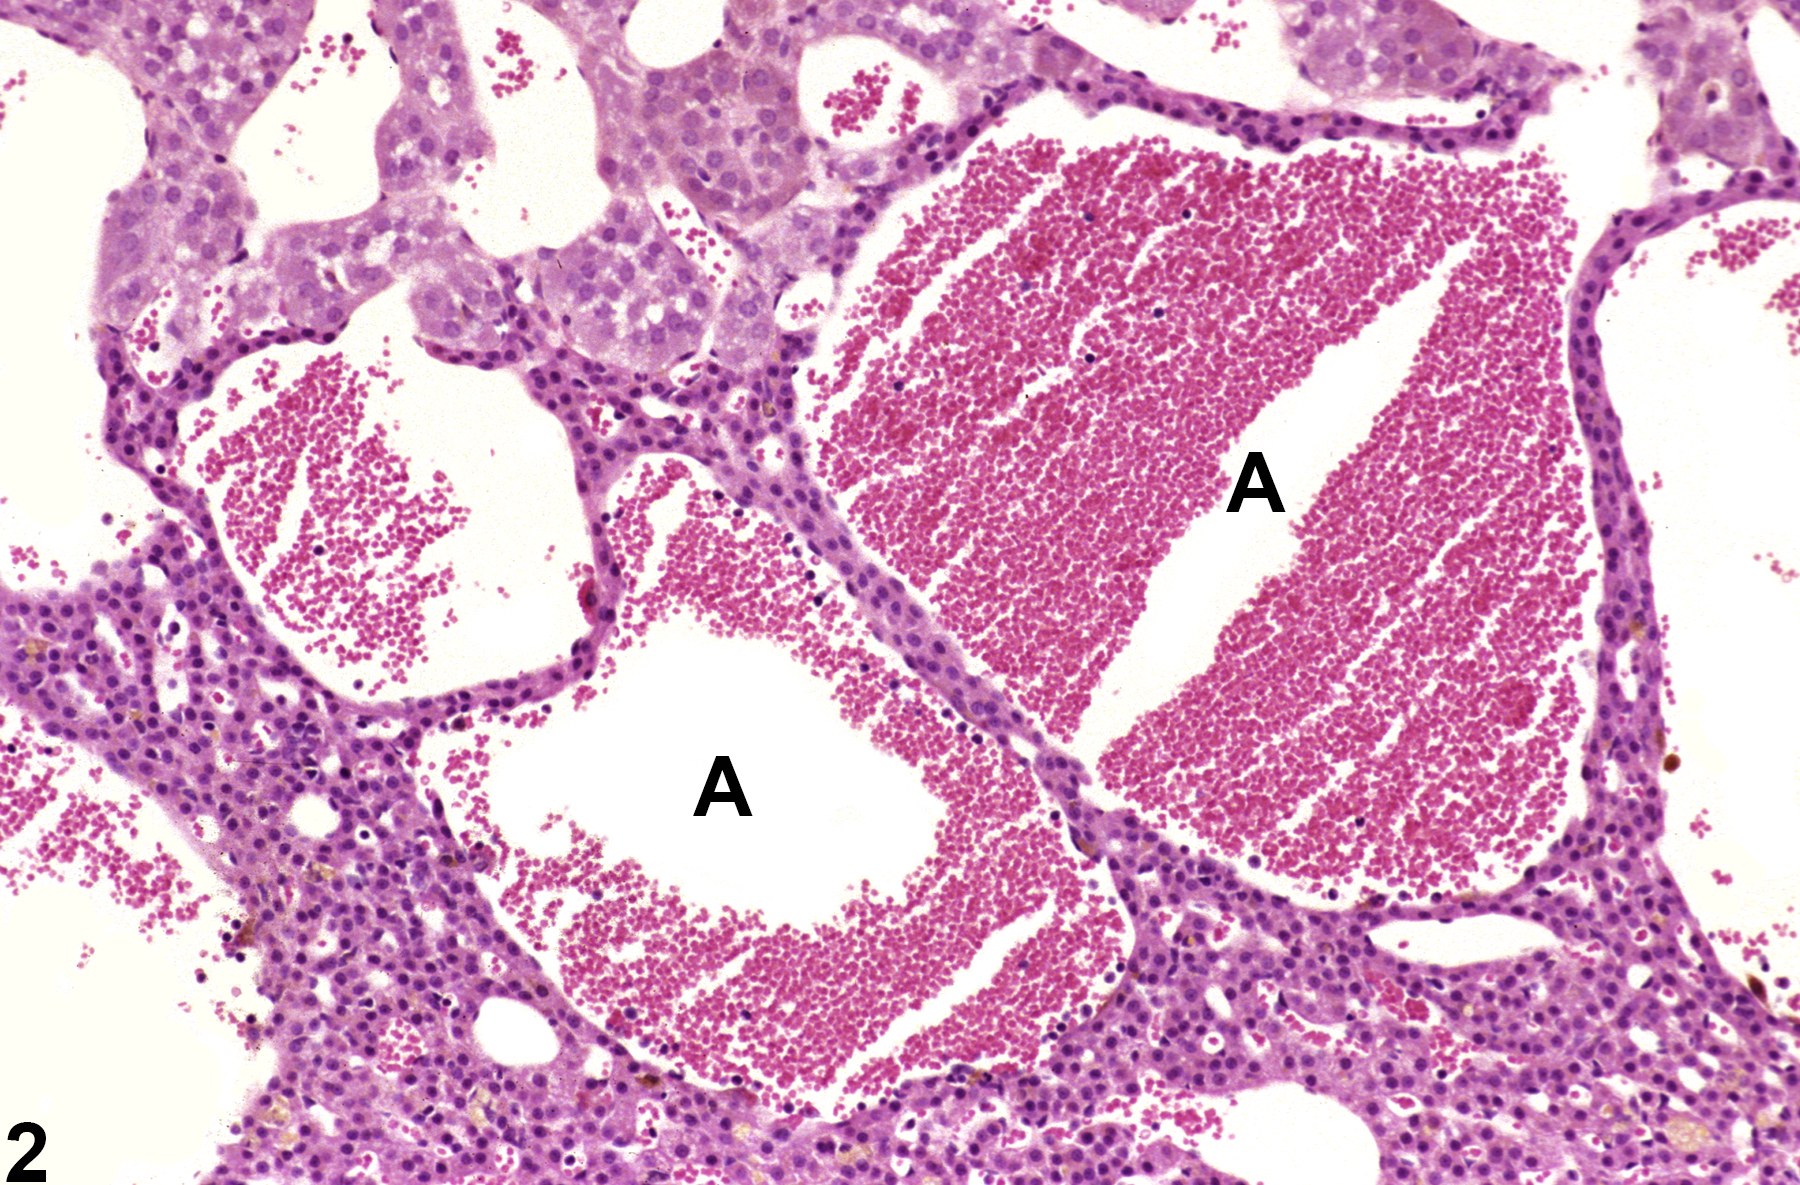 Image of angiectasis in the adrenal gland from a male F344/N rat in a chronic study